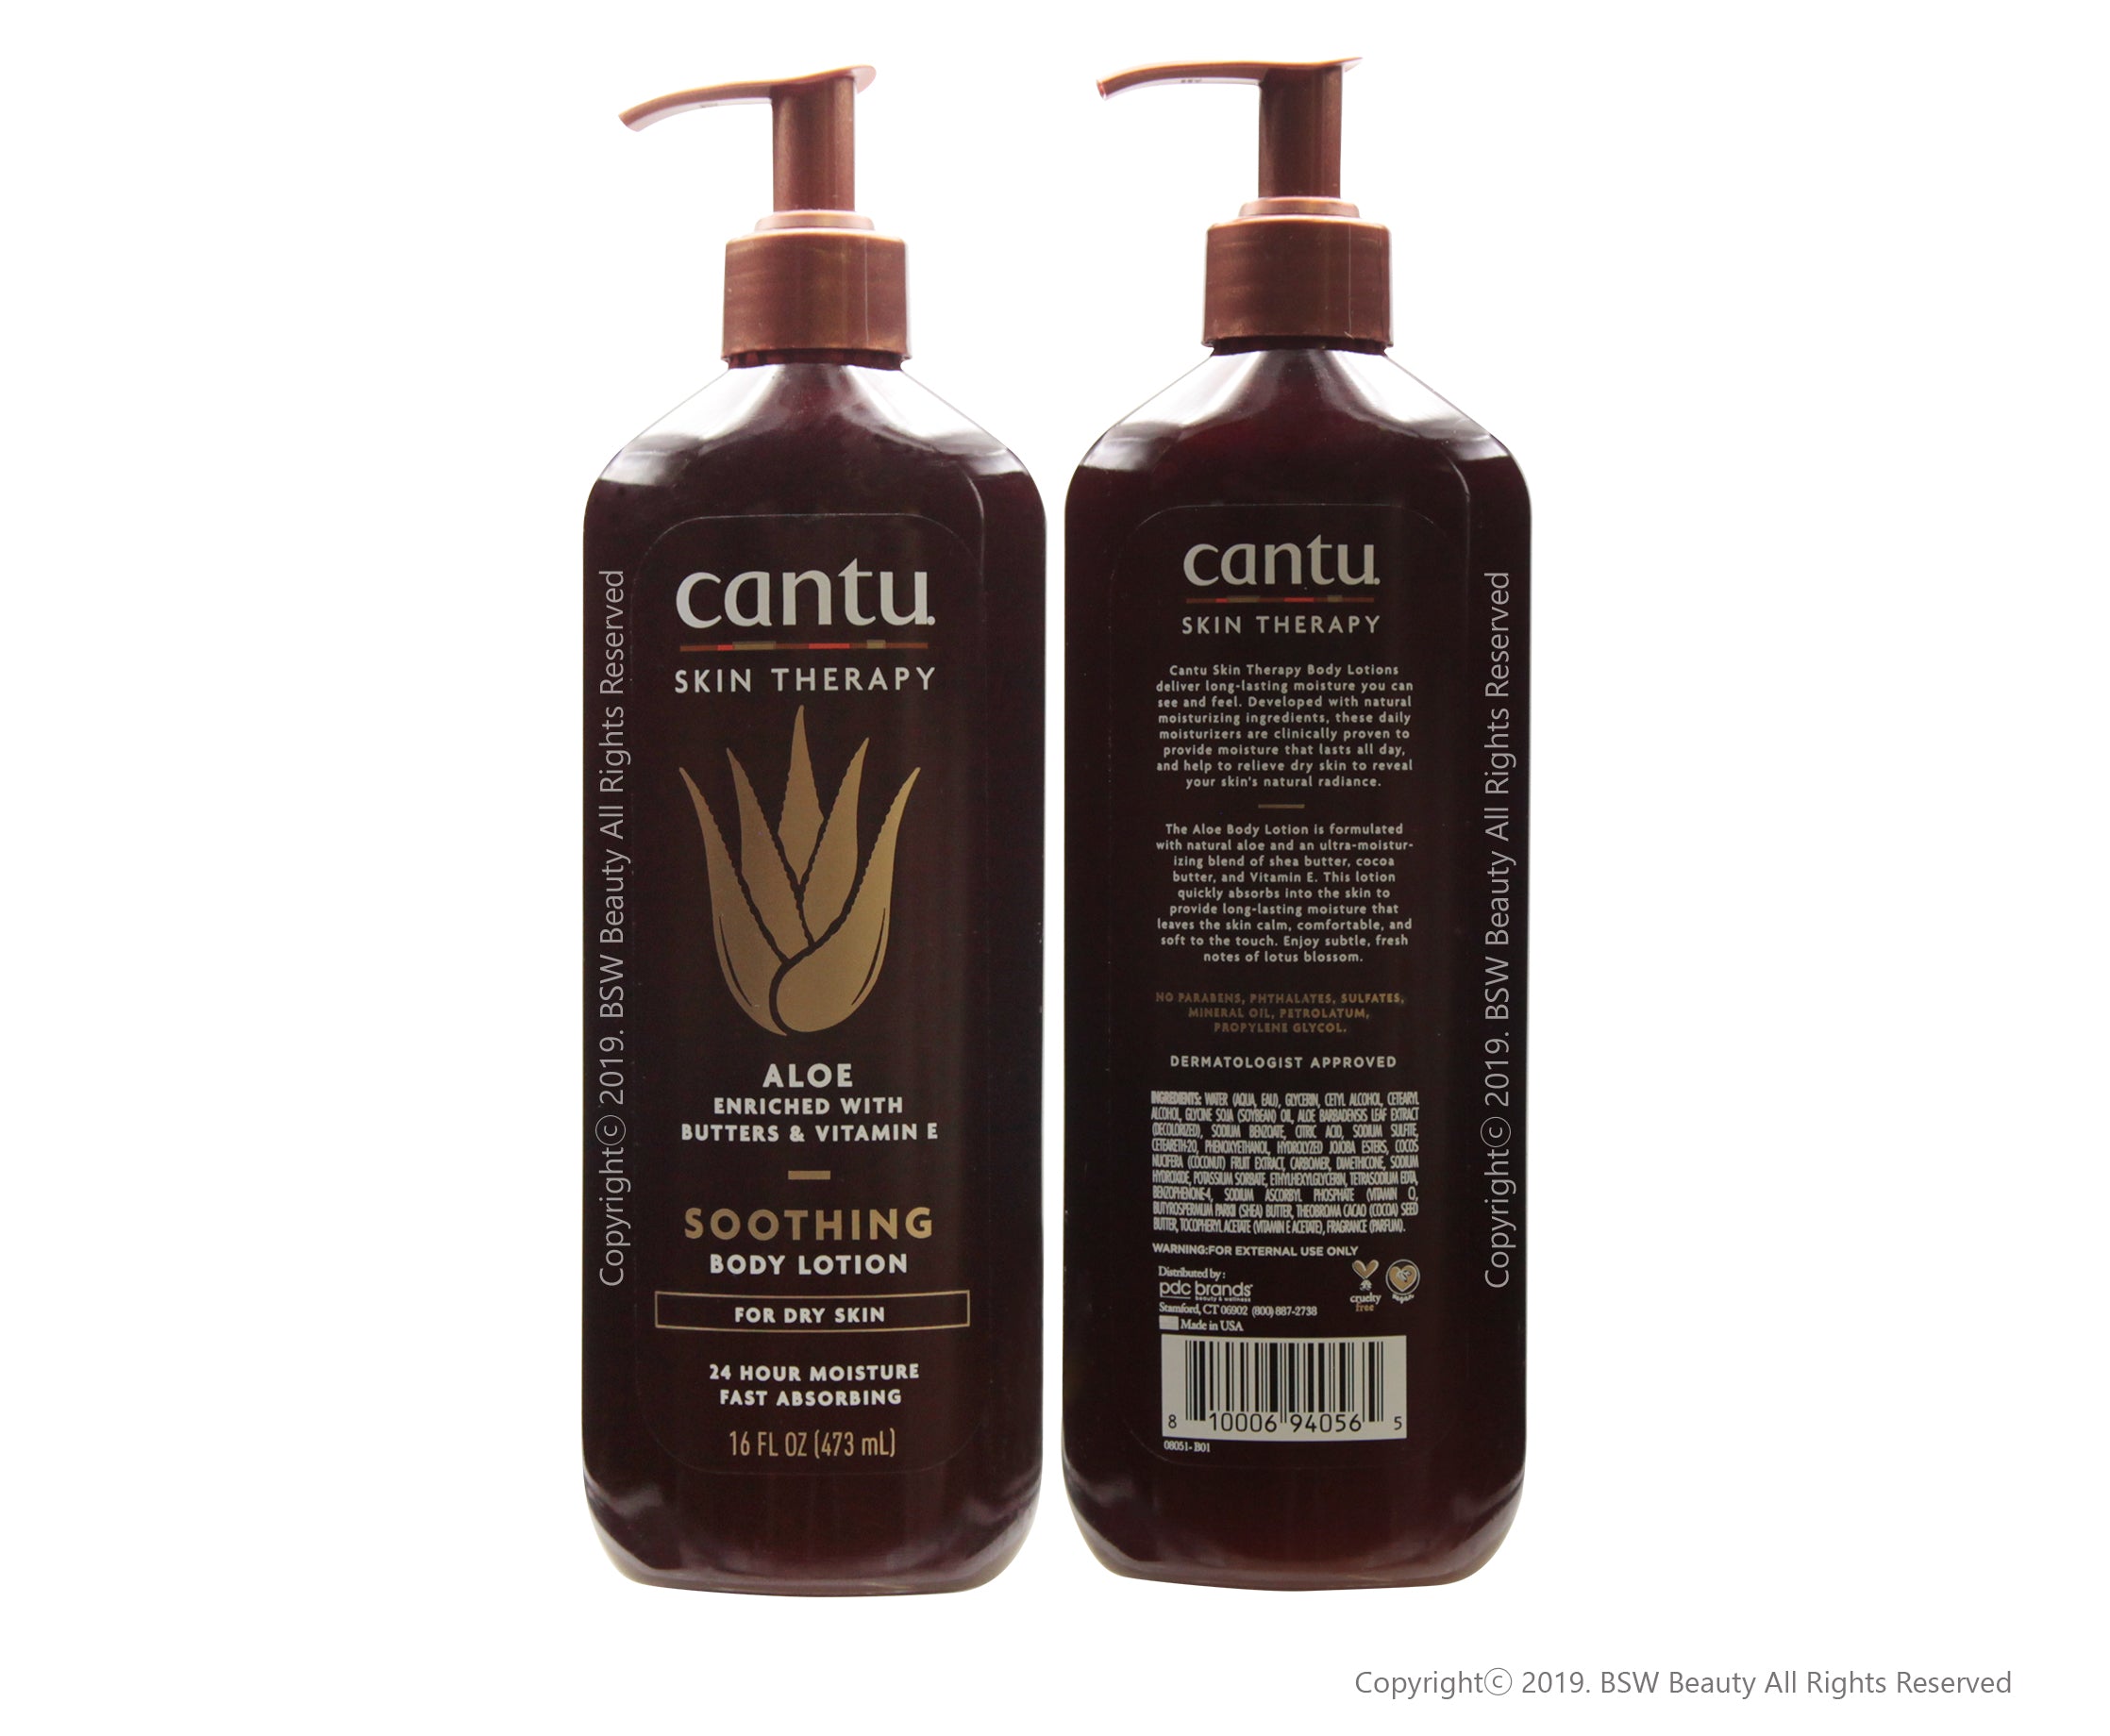 CANTU SKIN THERAPY BODY LOTION SOOTHING 16oz